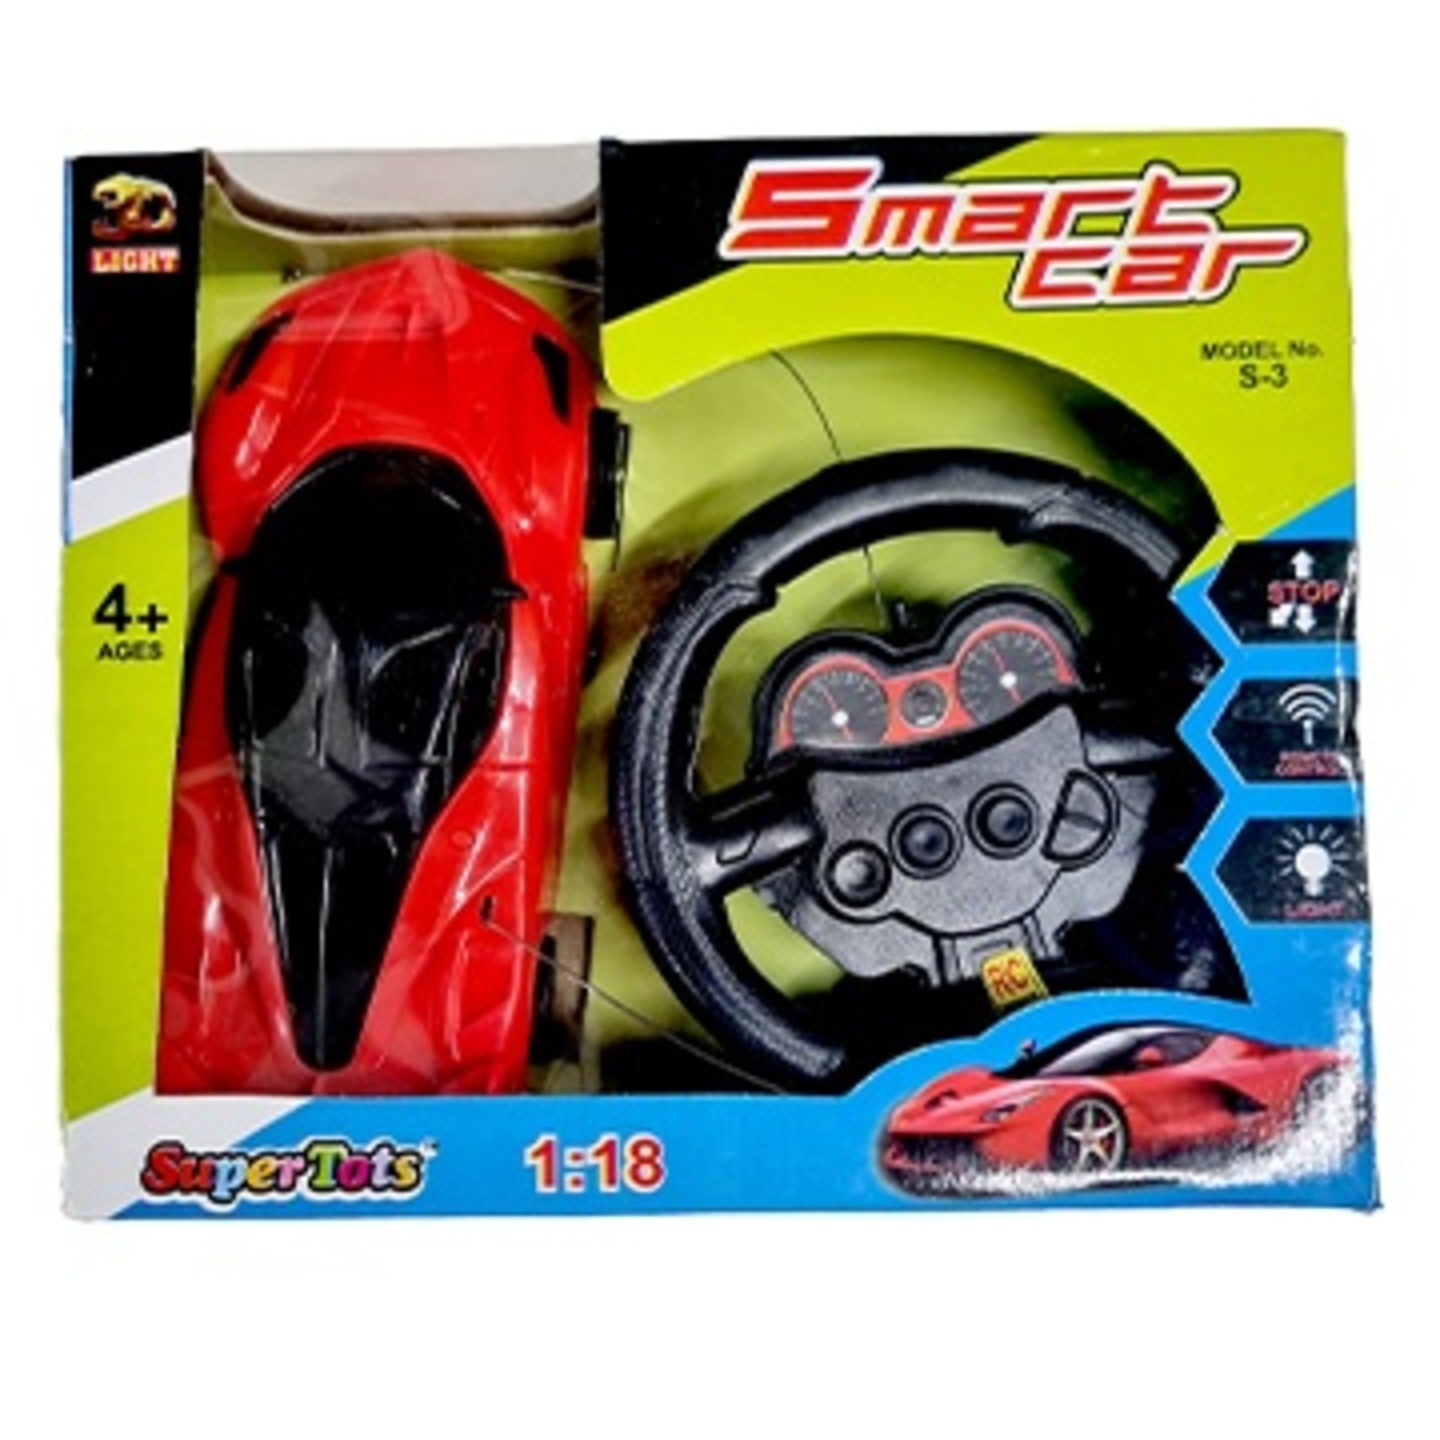 3D Steering Remote Control Car for Kids Model S-3